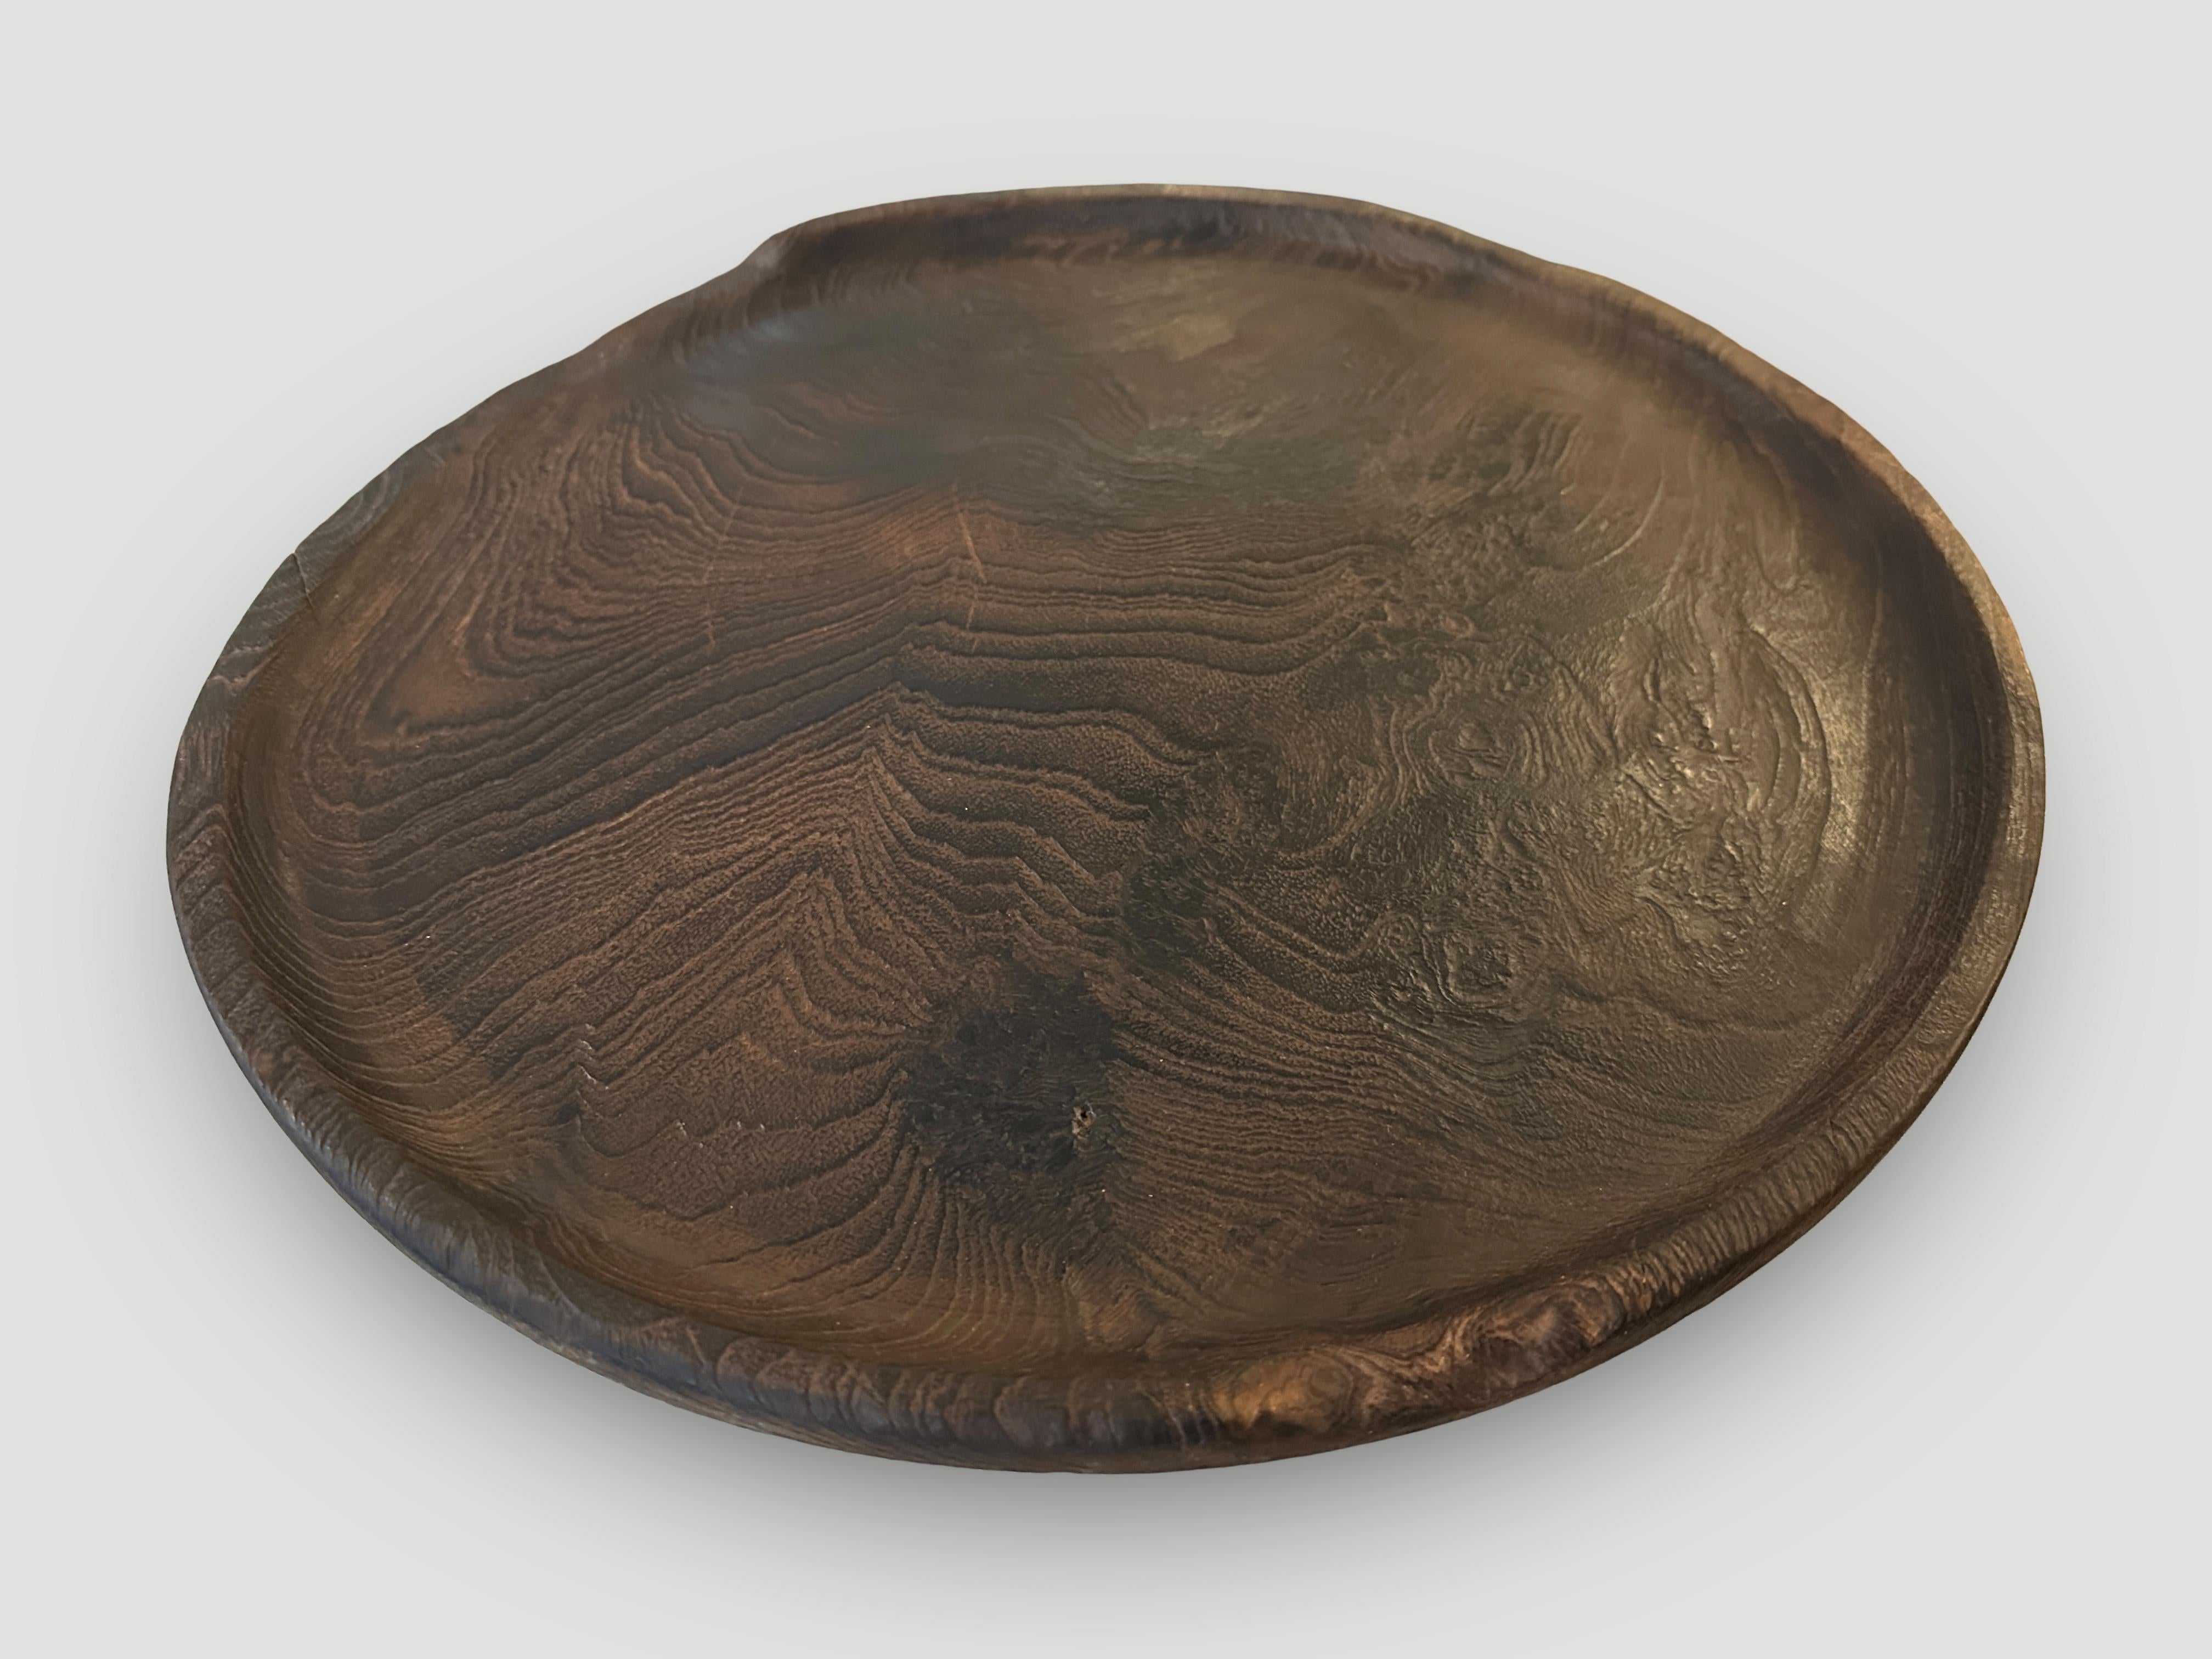 Andrianna Shamaris Minimalist Charred Teak Wood Shallow Platter In Excellent Condition For Sale In New York, NY